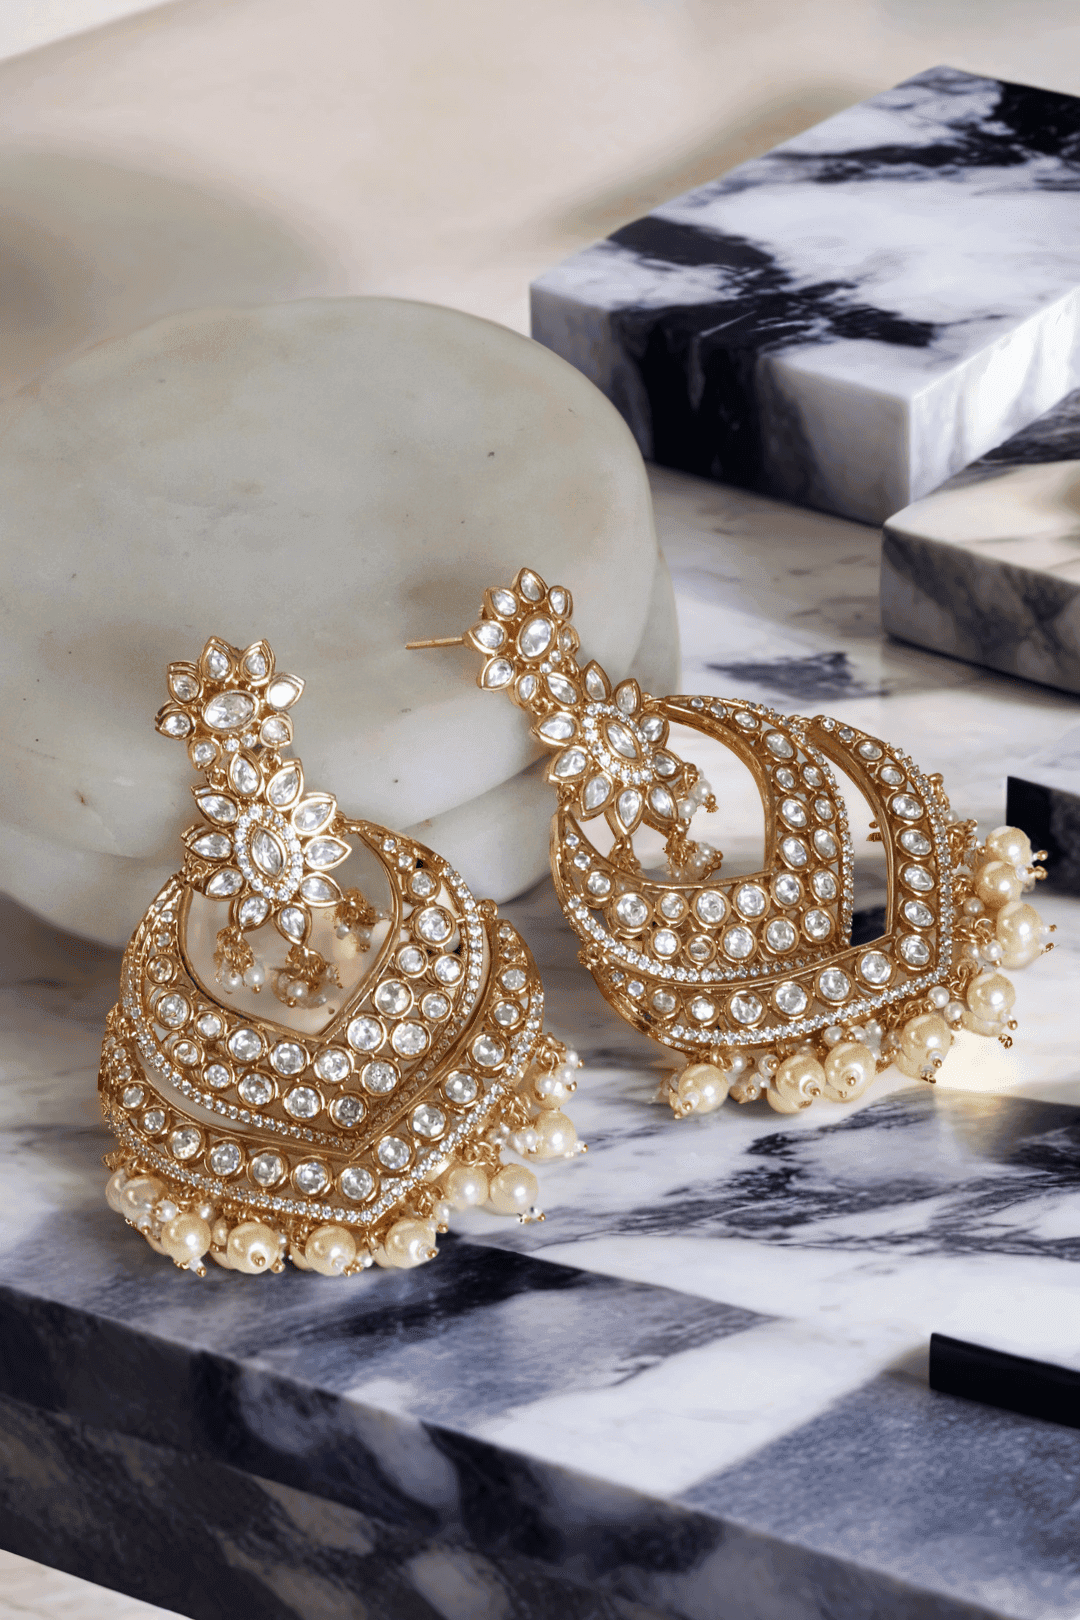 Ashmi Chandbali Statement Earrings - Gold-plated with Moissanite Polki stones, 3.5 inches long and 2.3 inches wide, designed for bold elegance.